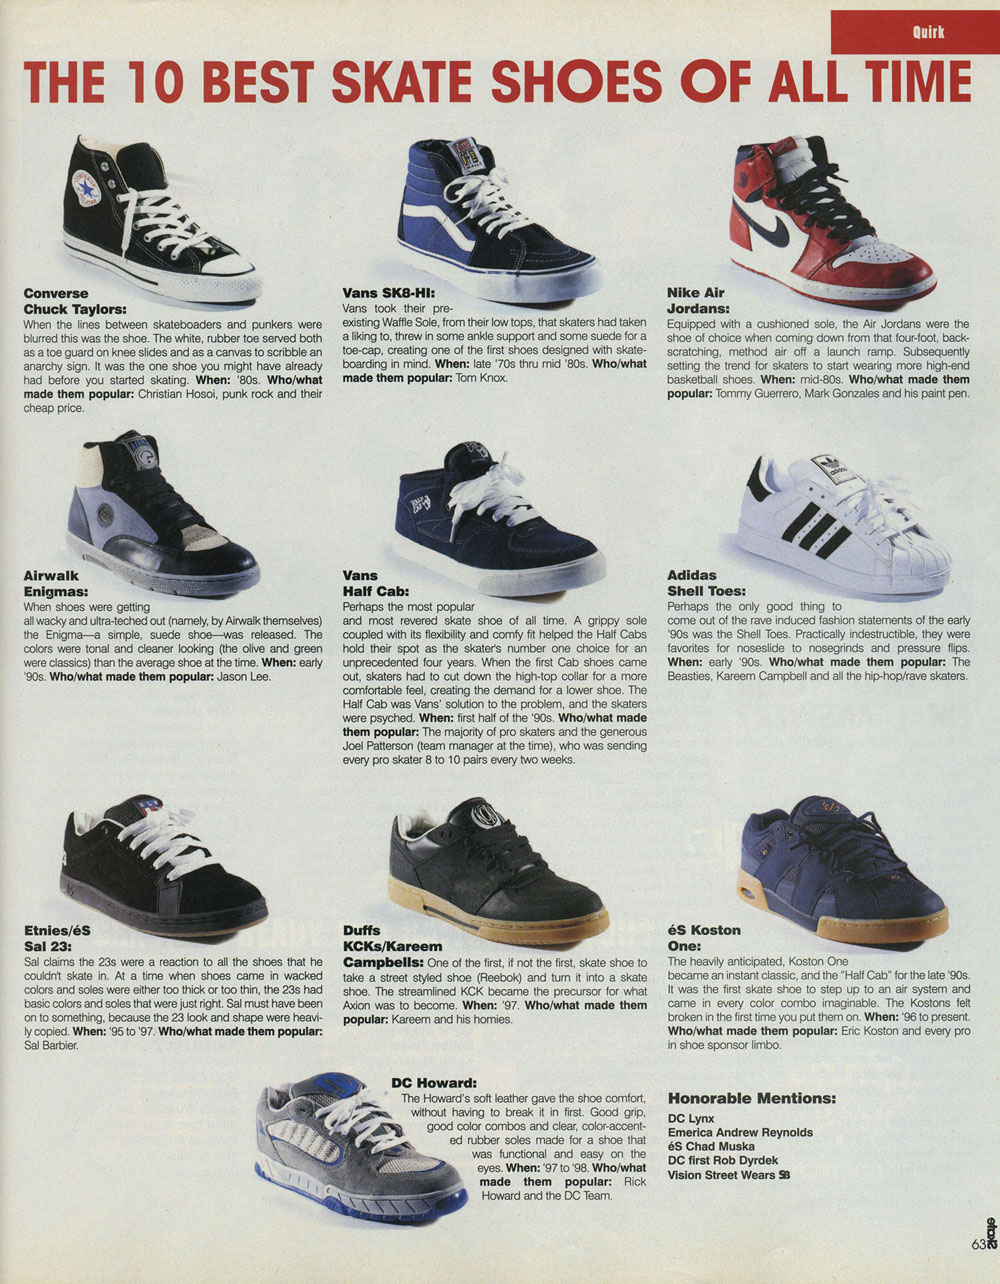 Who Had the Hottest Shoes in the 90s?